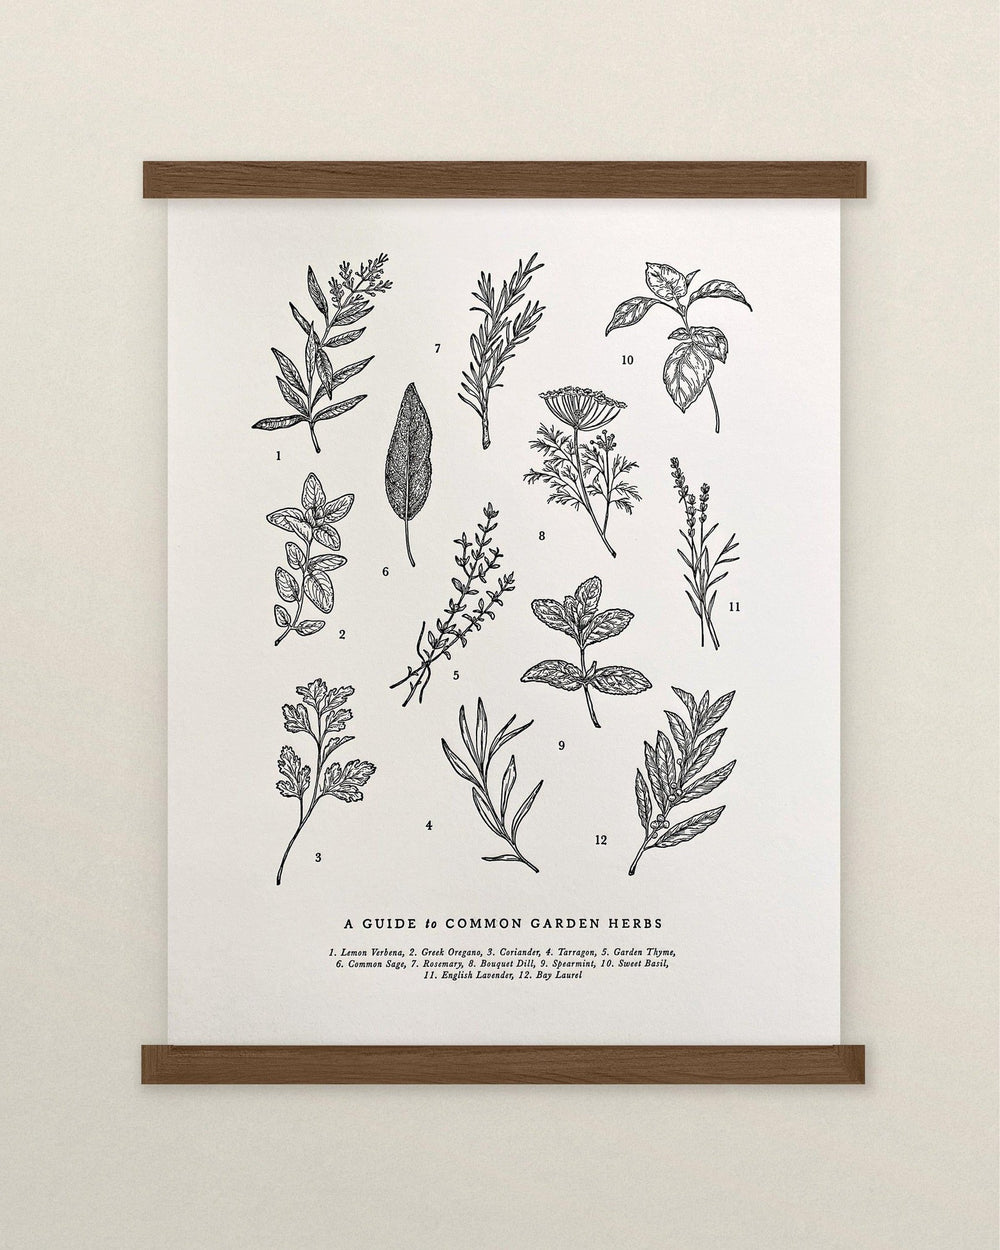 A Guide to Garden Herbs Chart Print of herbs on a wall by The Wild Wander.